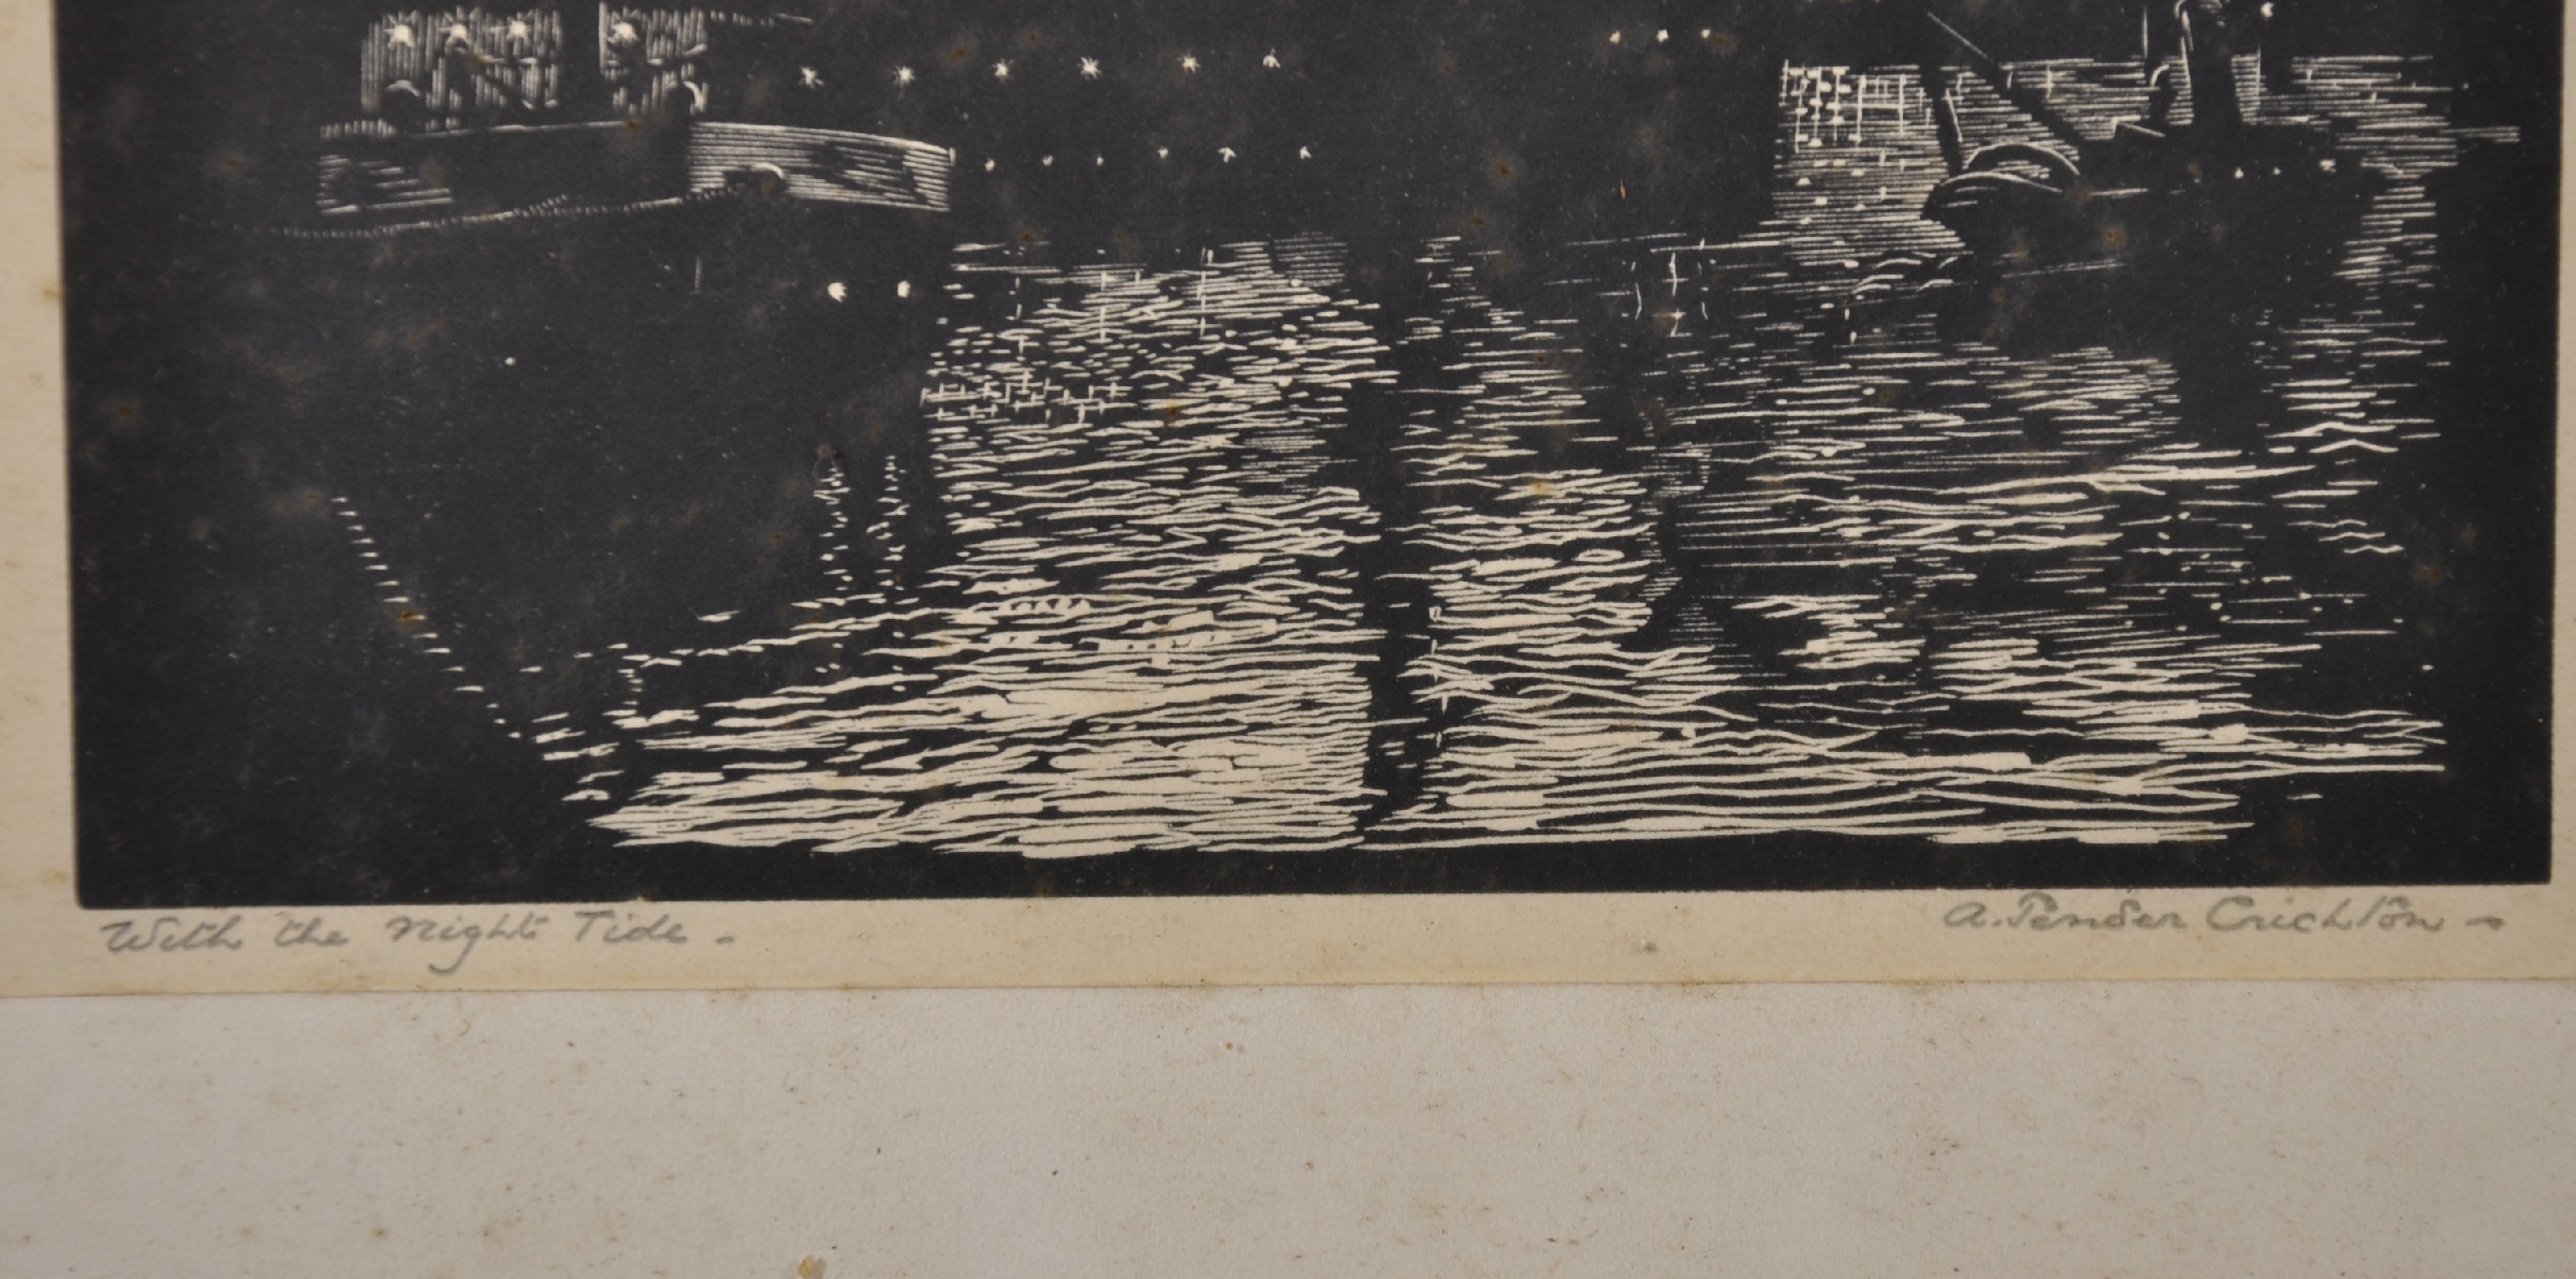 A... Tender Crichton (20th Century) British. "With The Night Tide", Woodcut, Signed and Inscribed, - Image 4 of 6